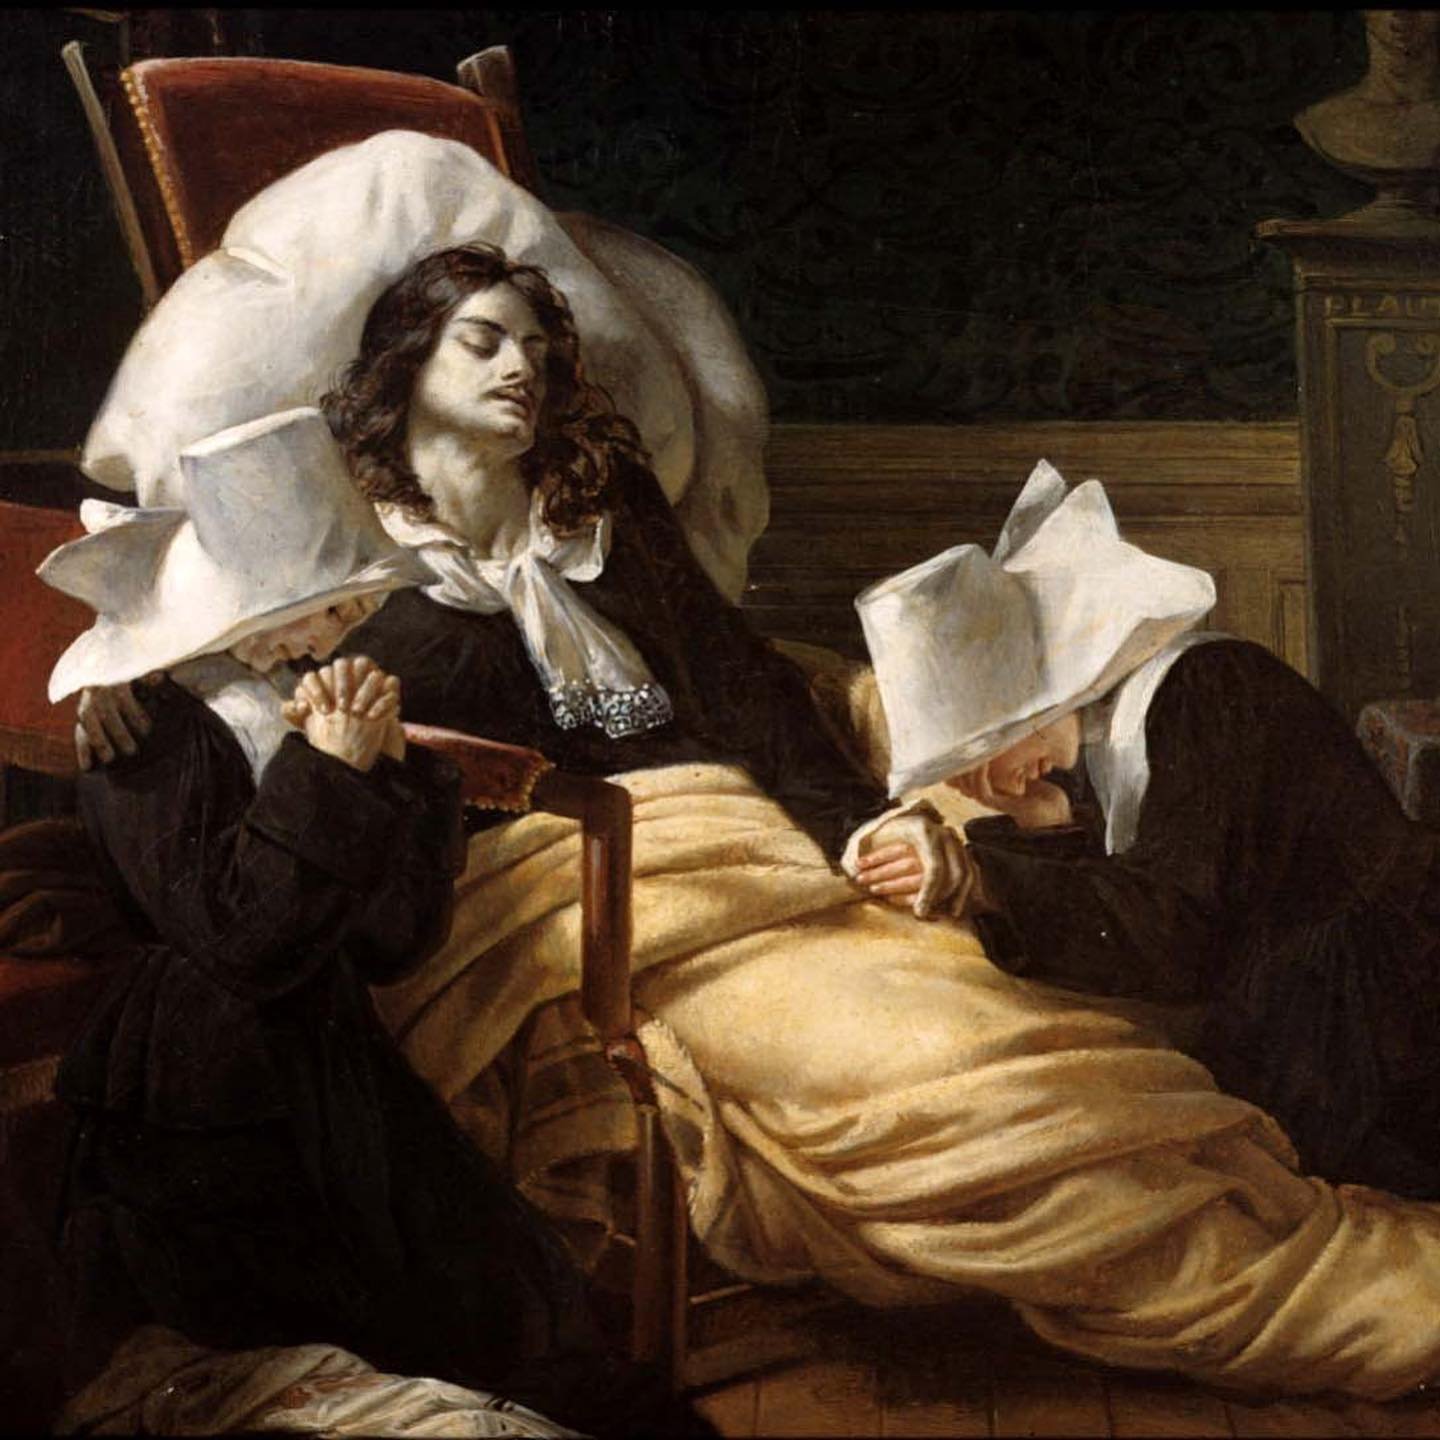 Moliere-Death-Bed-Painting.jpg